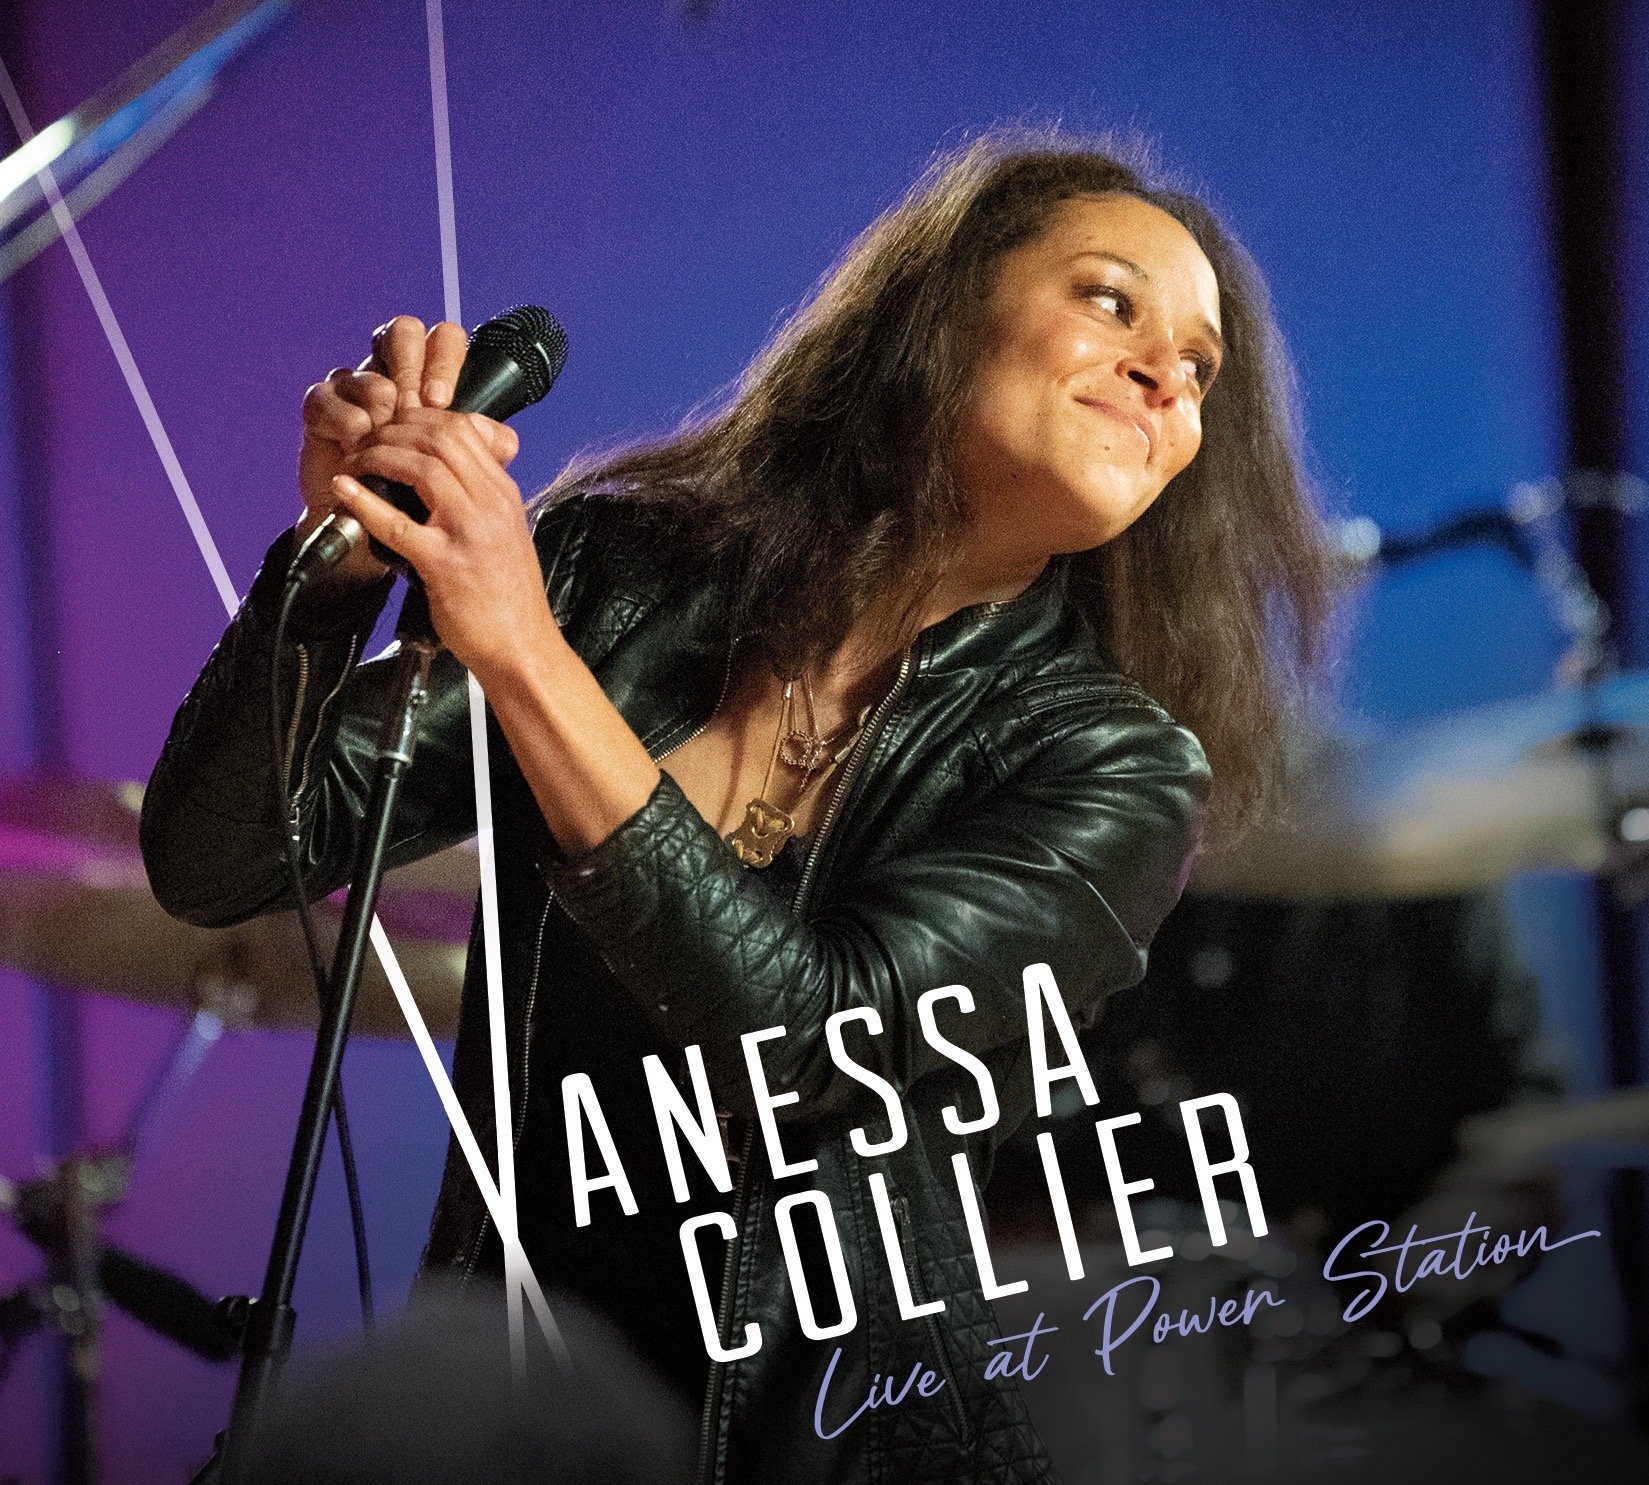 VANESSA COLLIER - Live At Power Station cover 